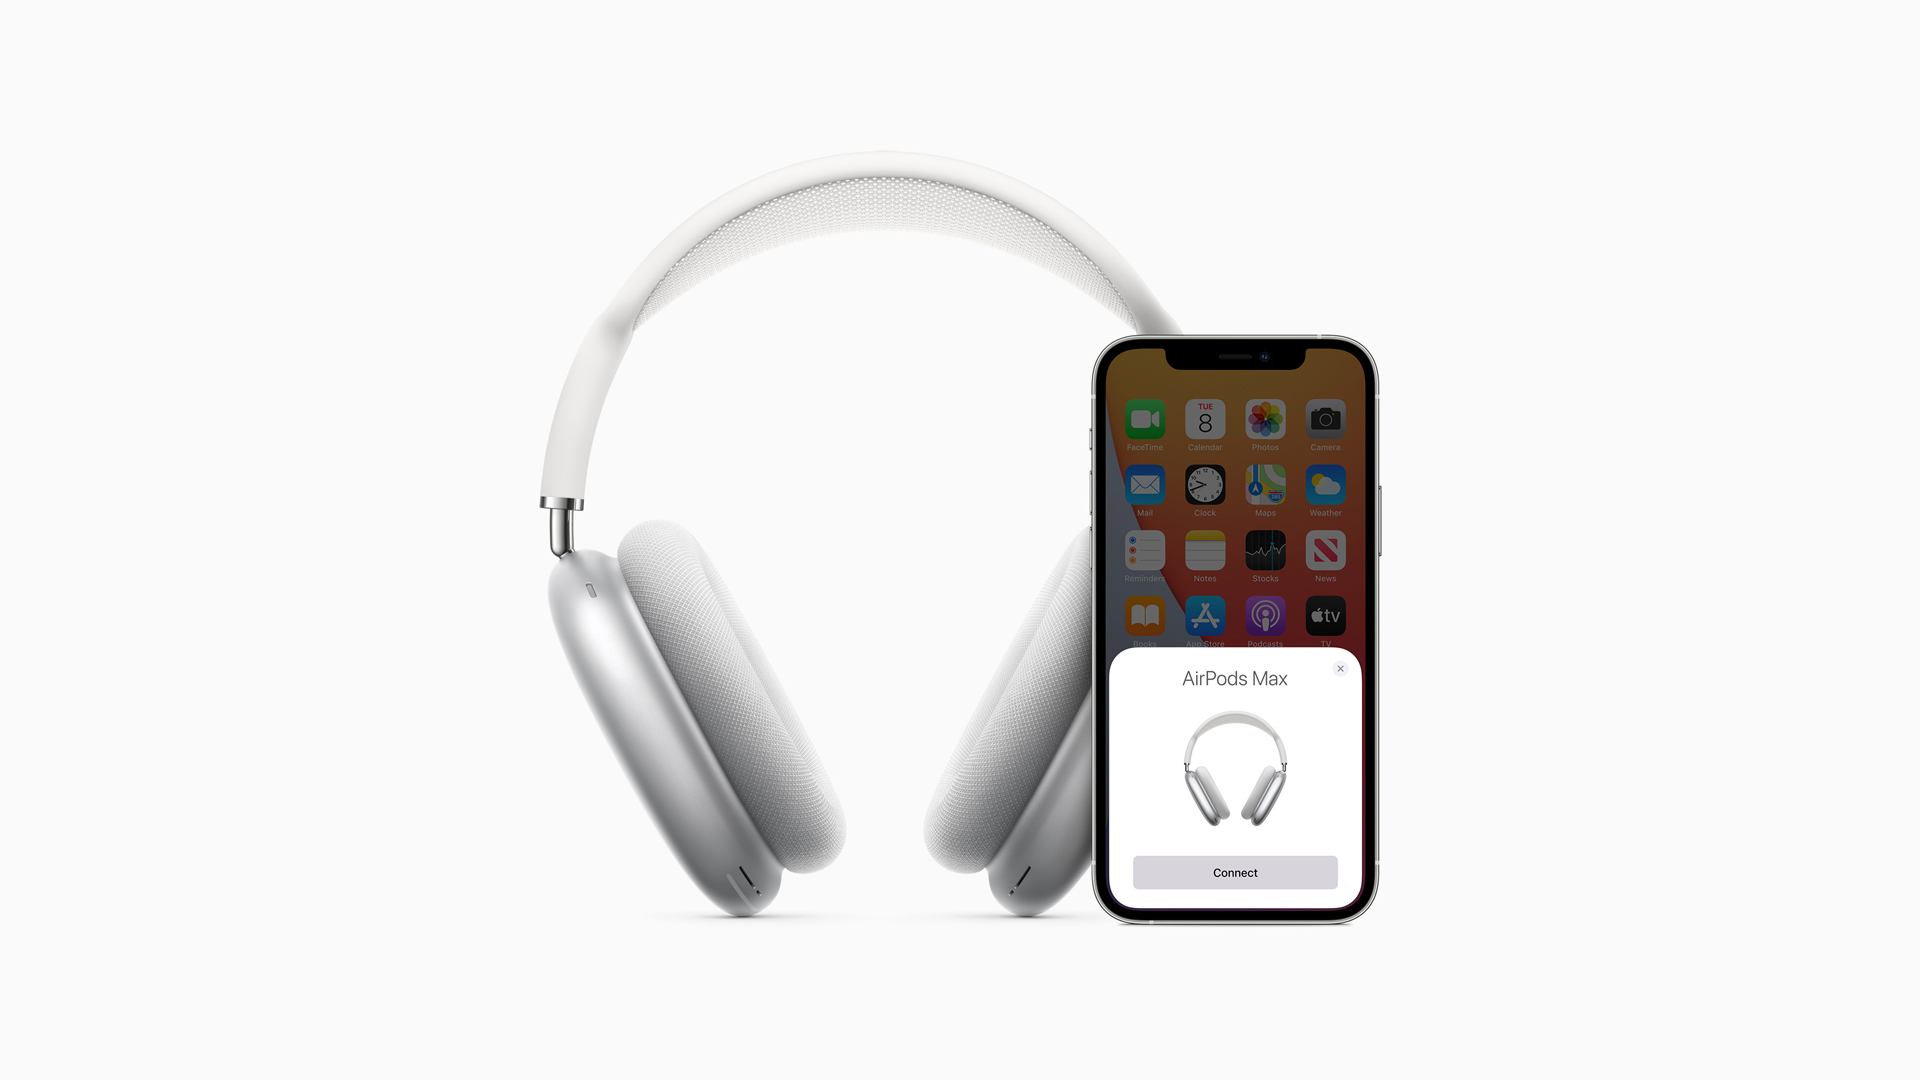 AirPods Max pairing to iOS phone on a white background.